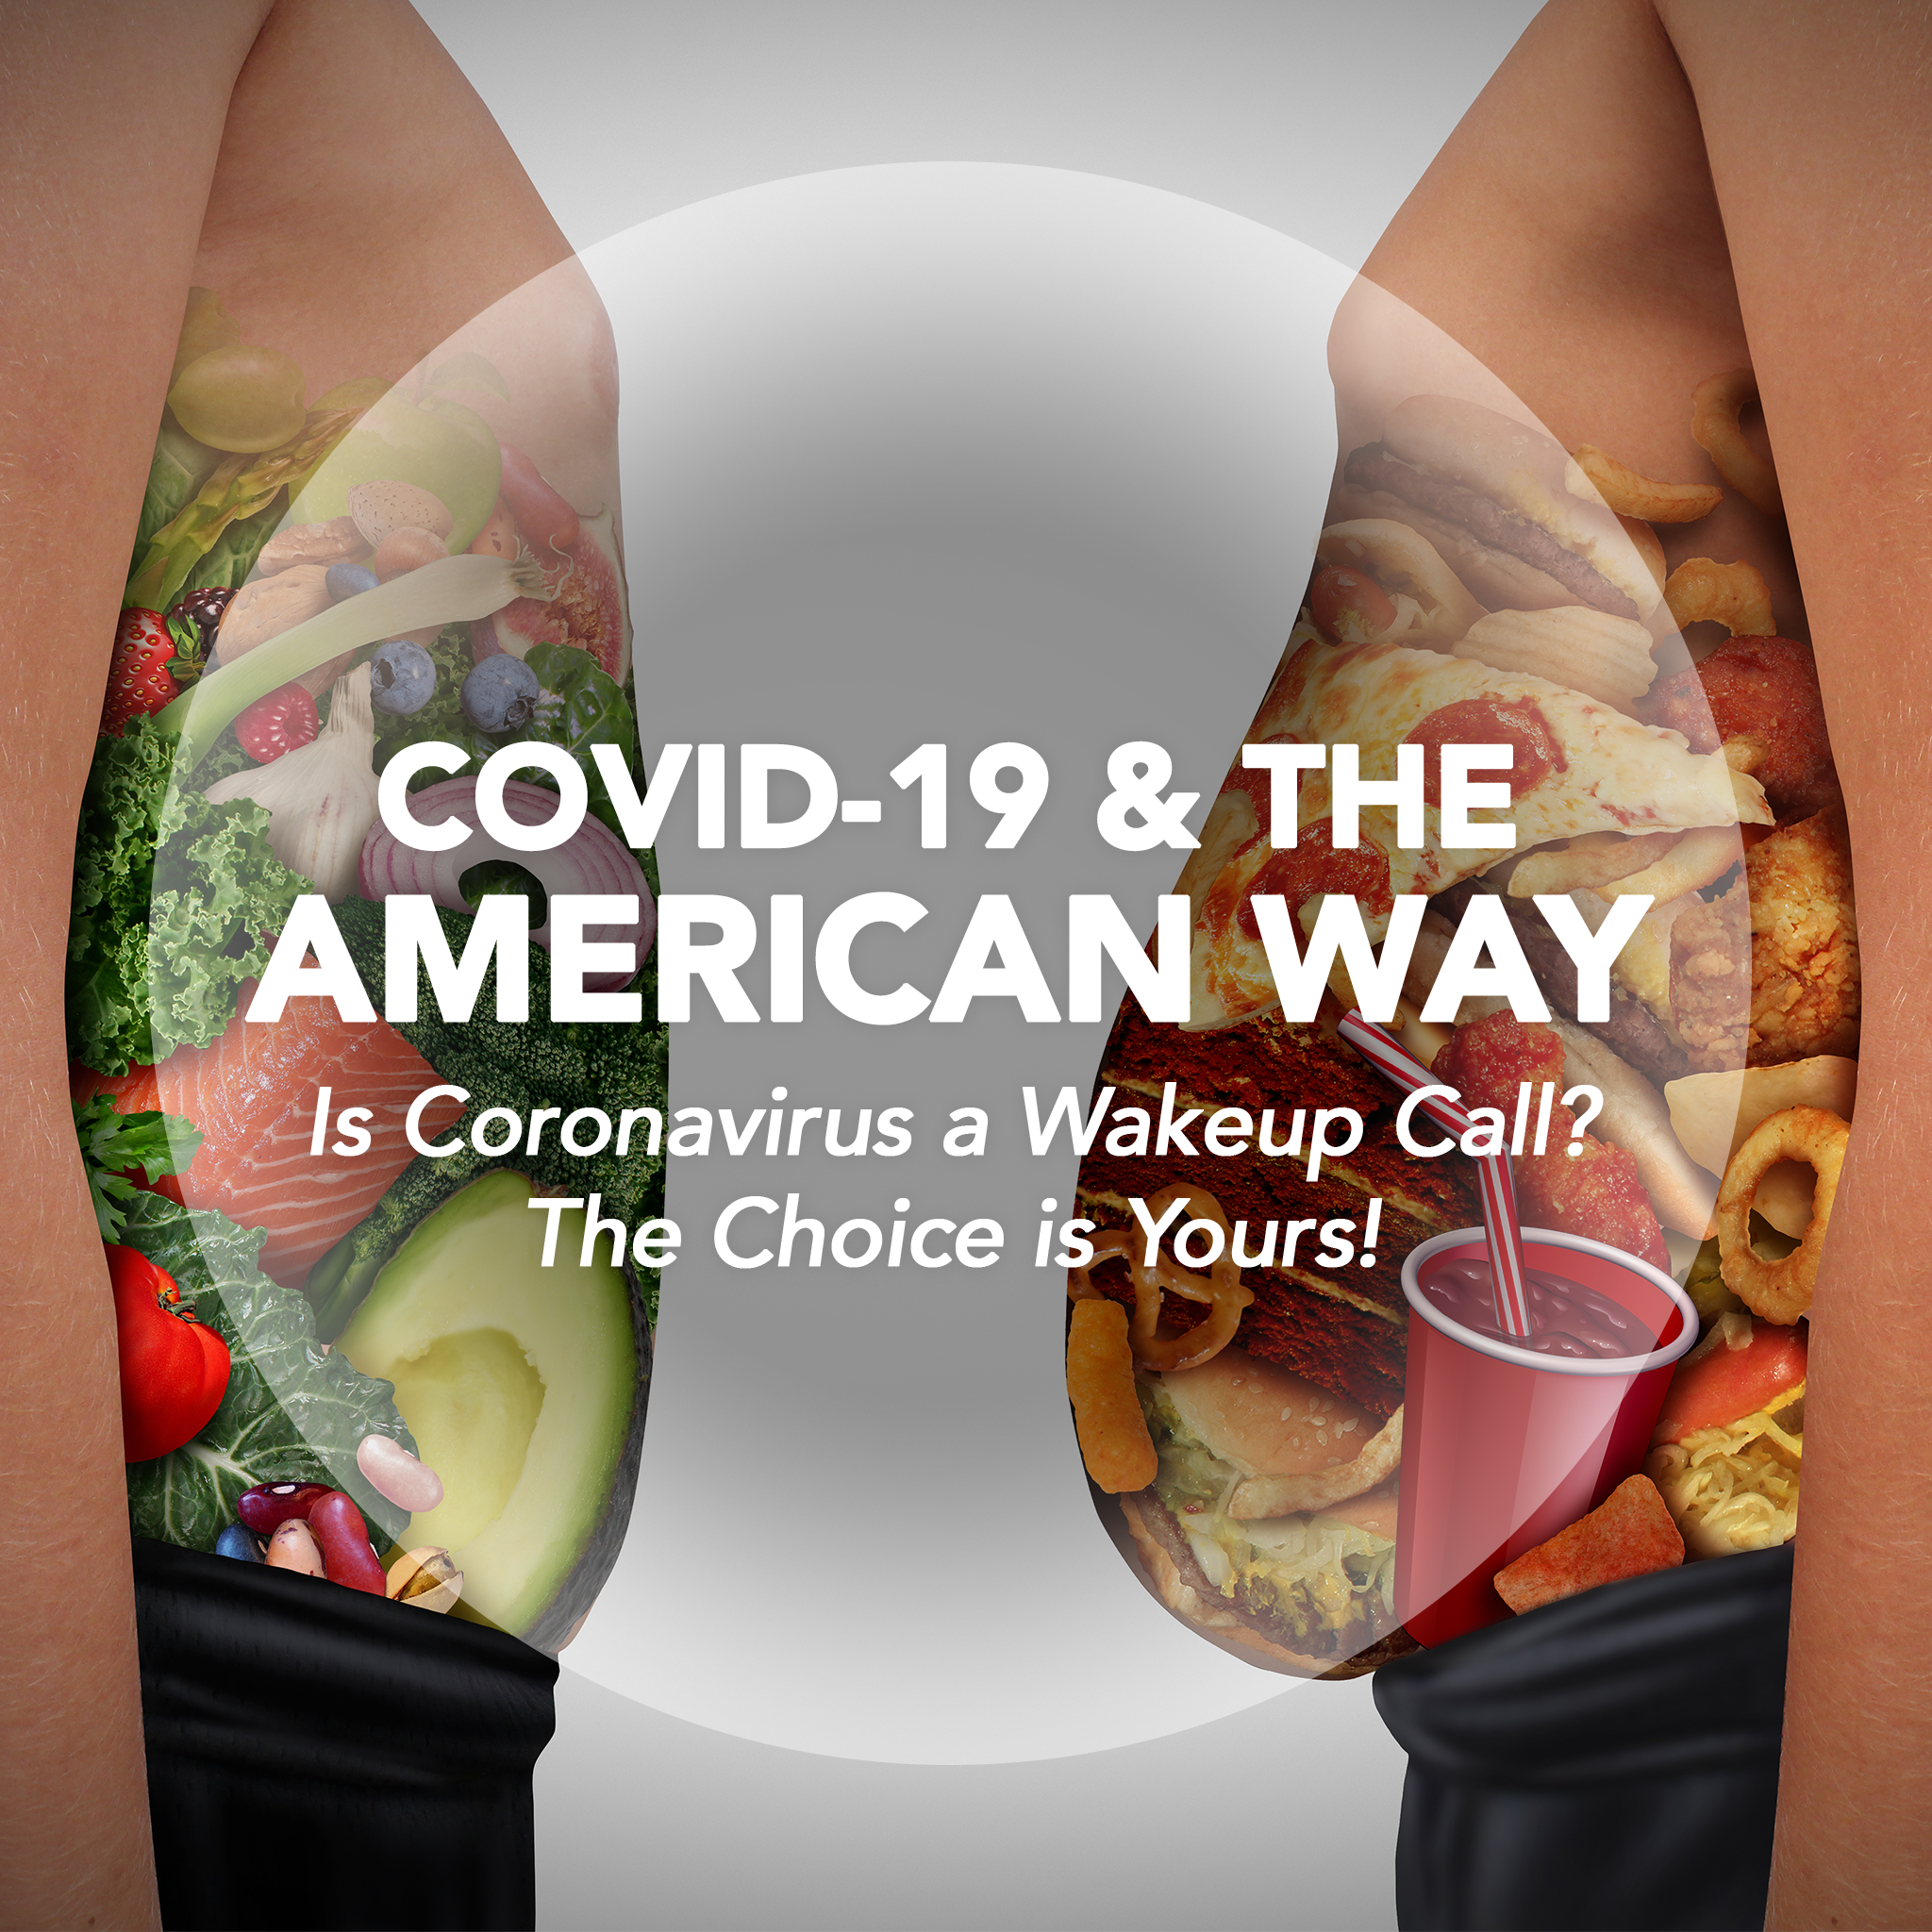 Covid-19 and The American Way